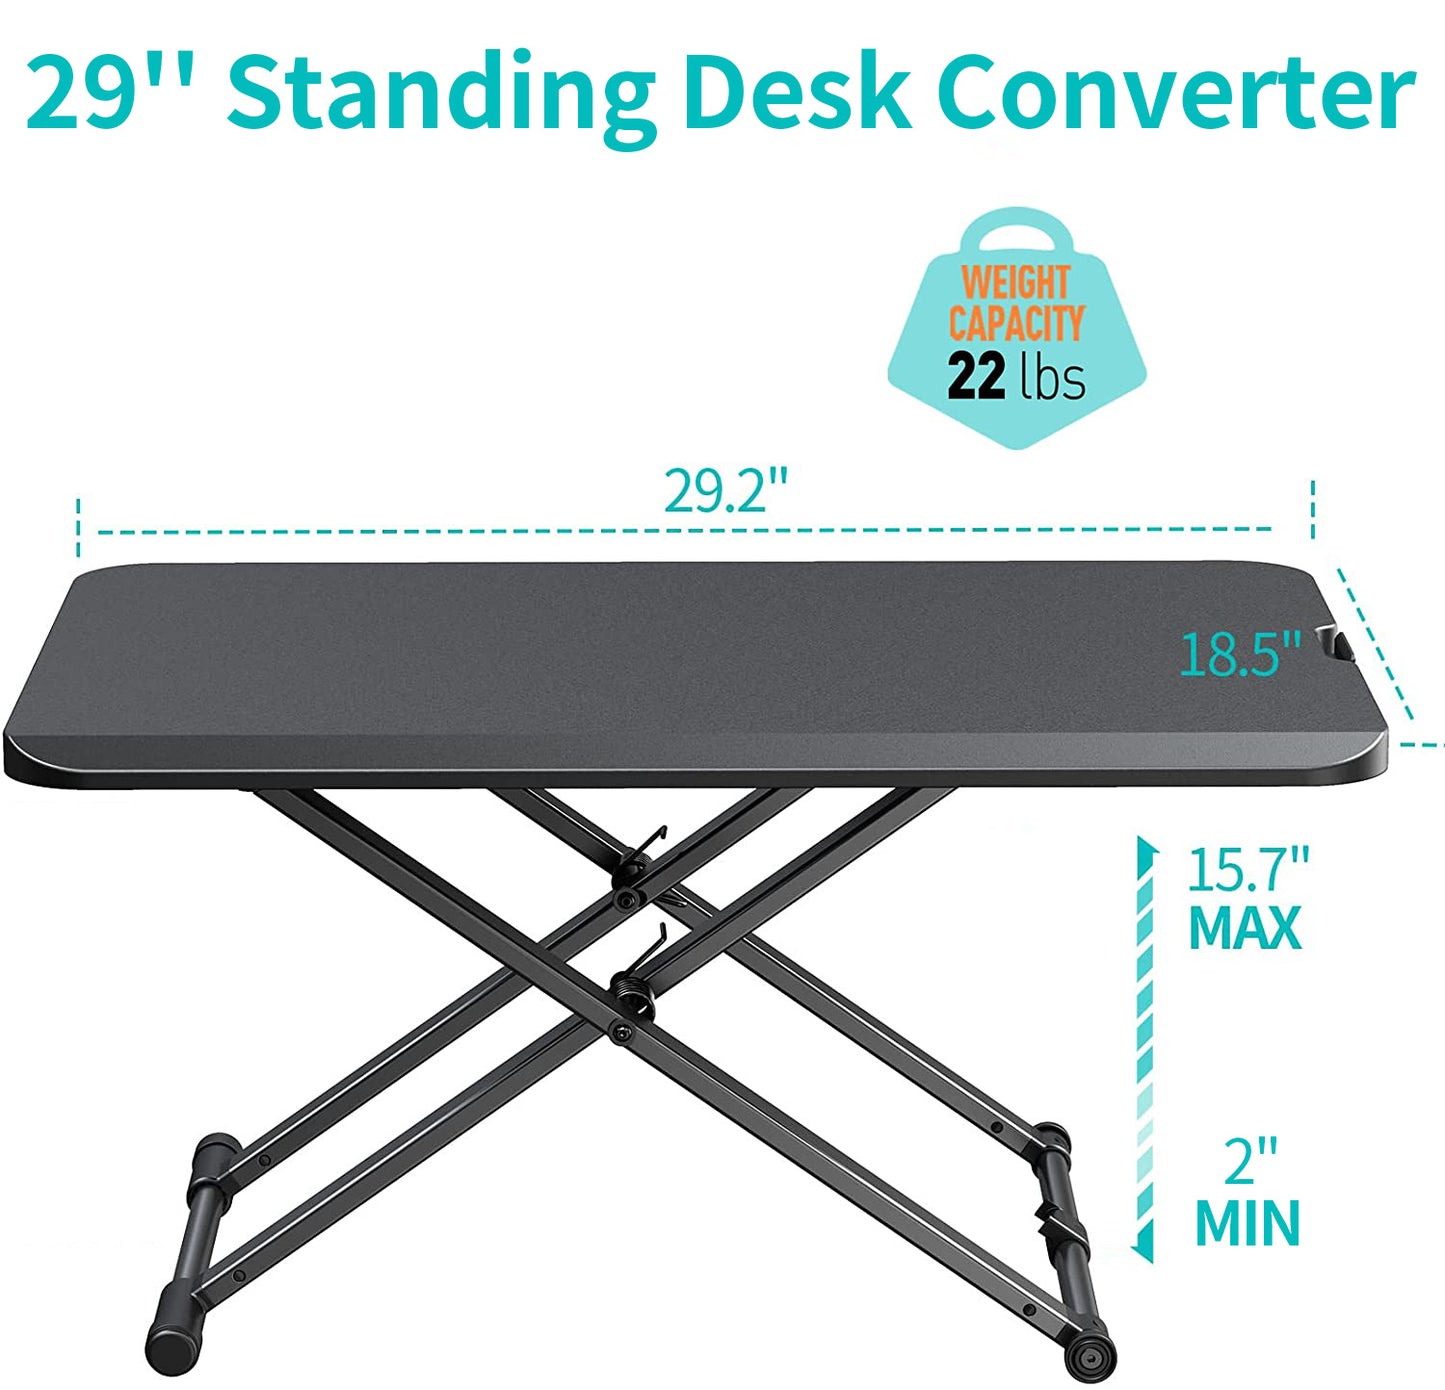 29'' desk riser laods up to 22 lbs